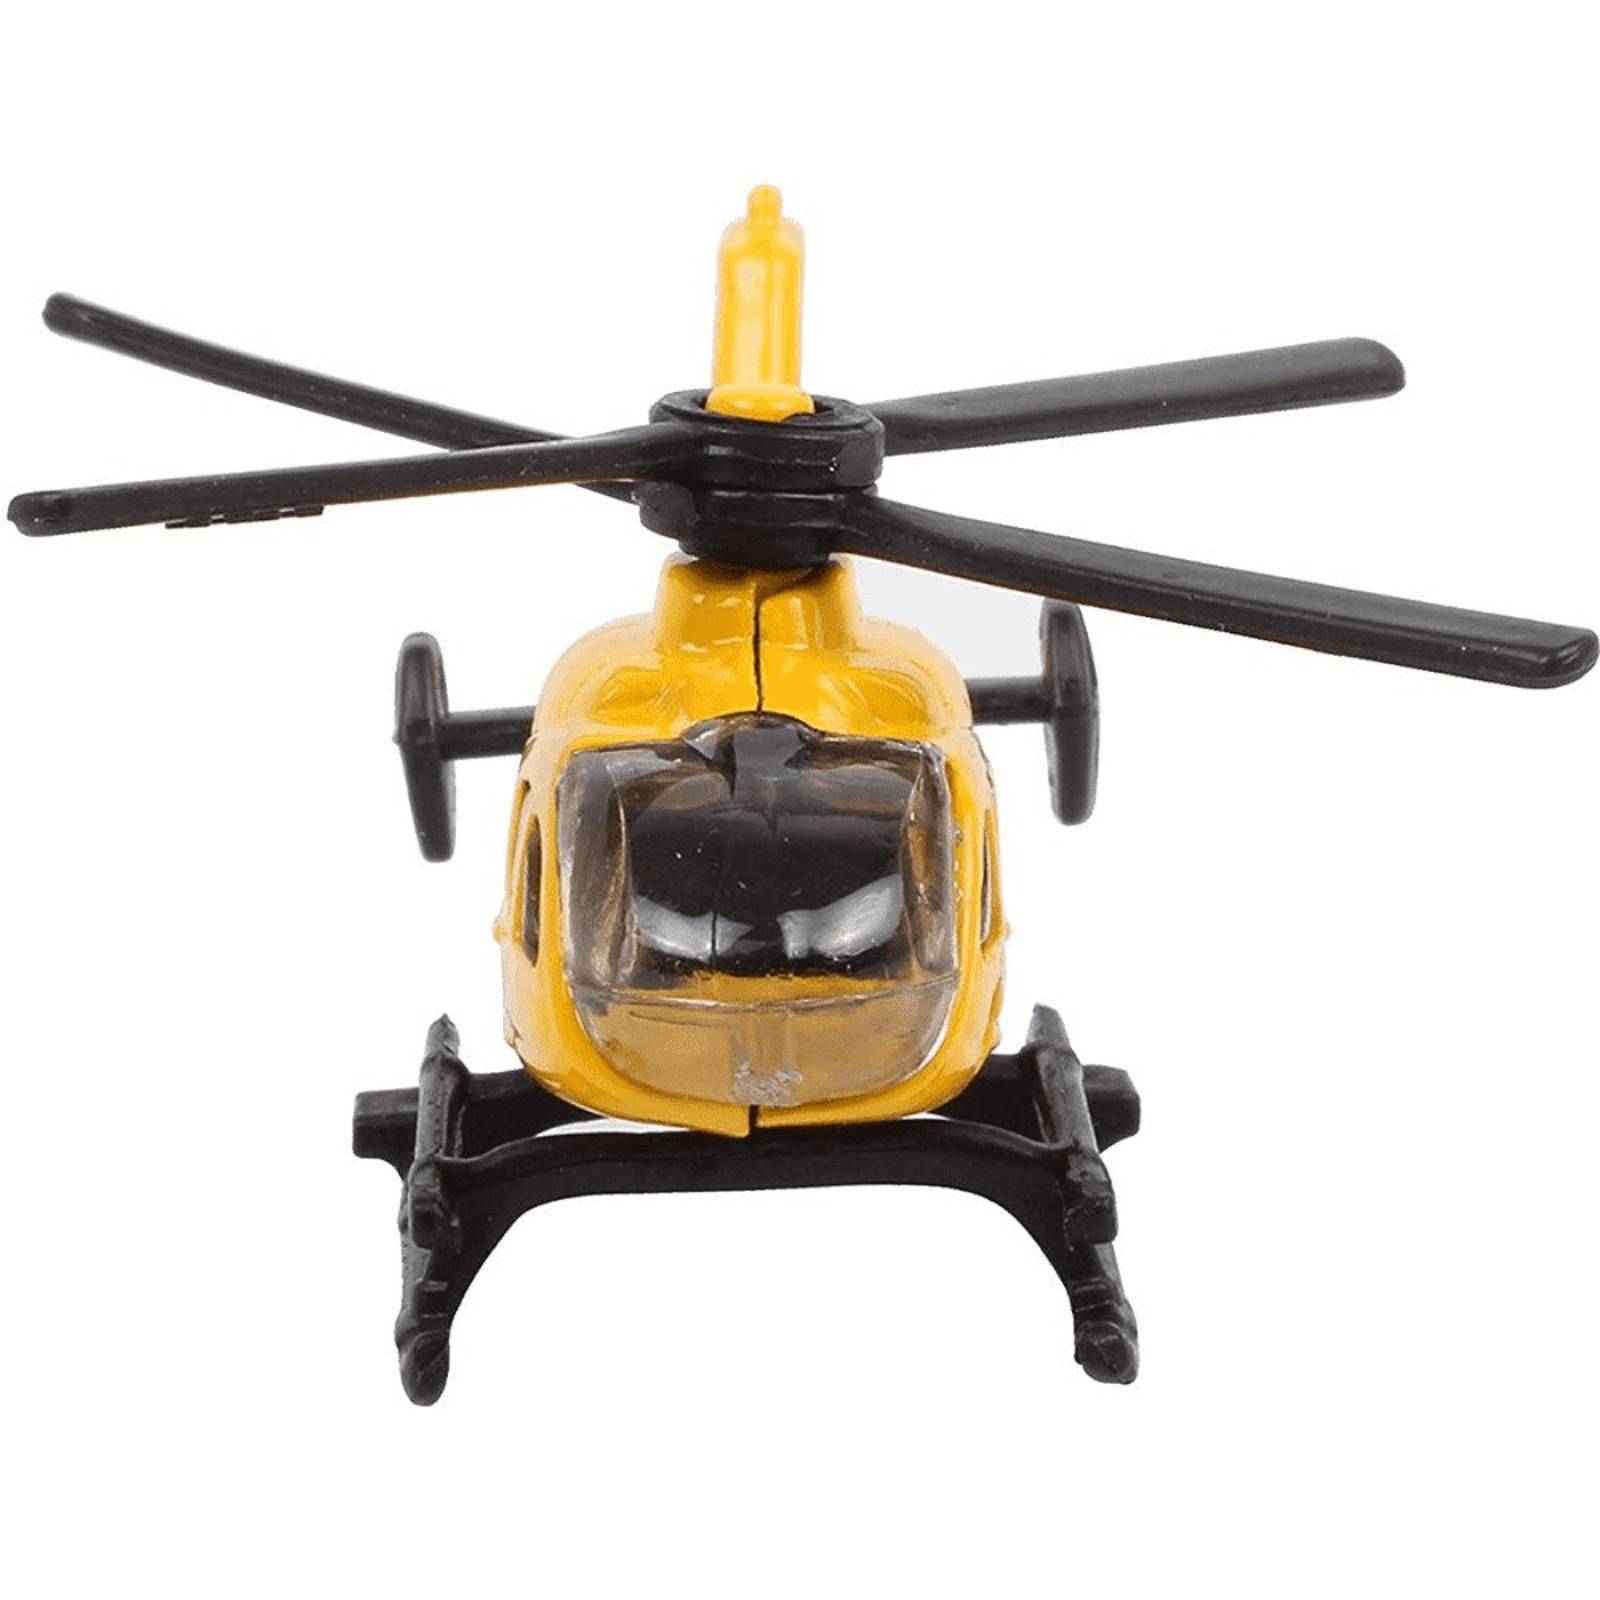 Helicopter Air Ambulance - Single Die-Cast SIKU Toy Vehicle 0856 thumbnails